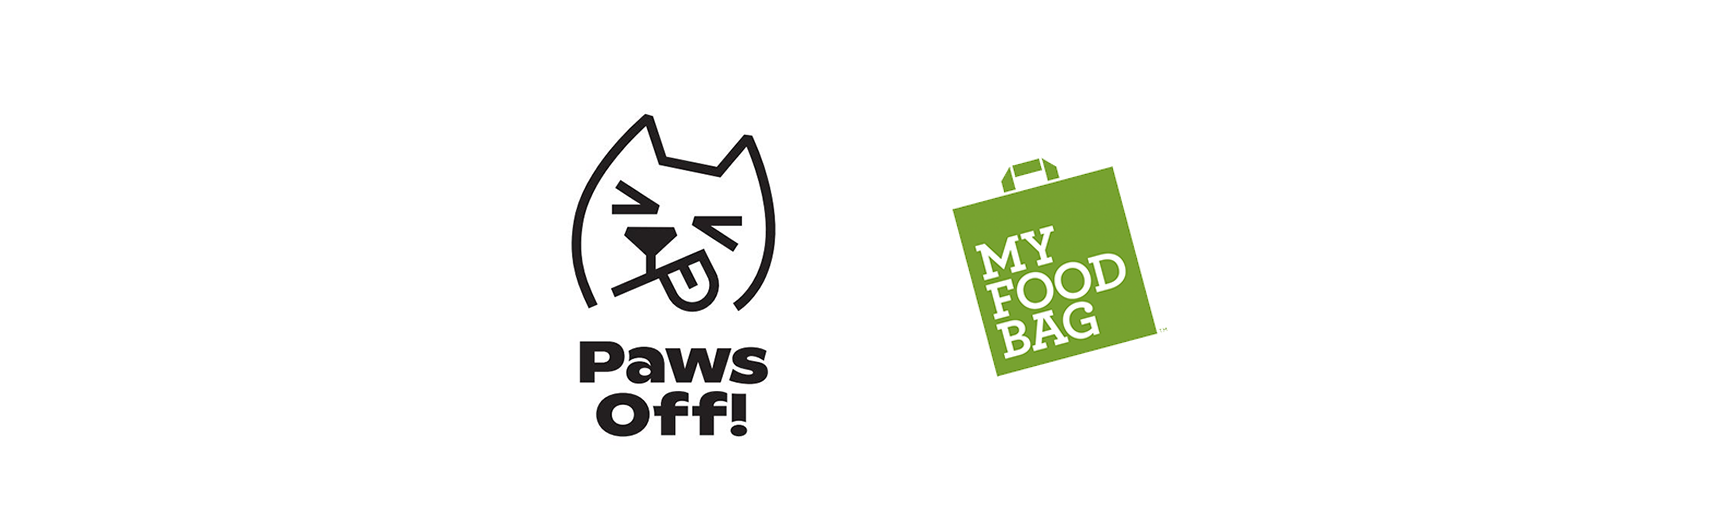 My Food Bag joins SCPI to support PawsOff!